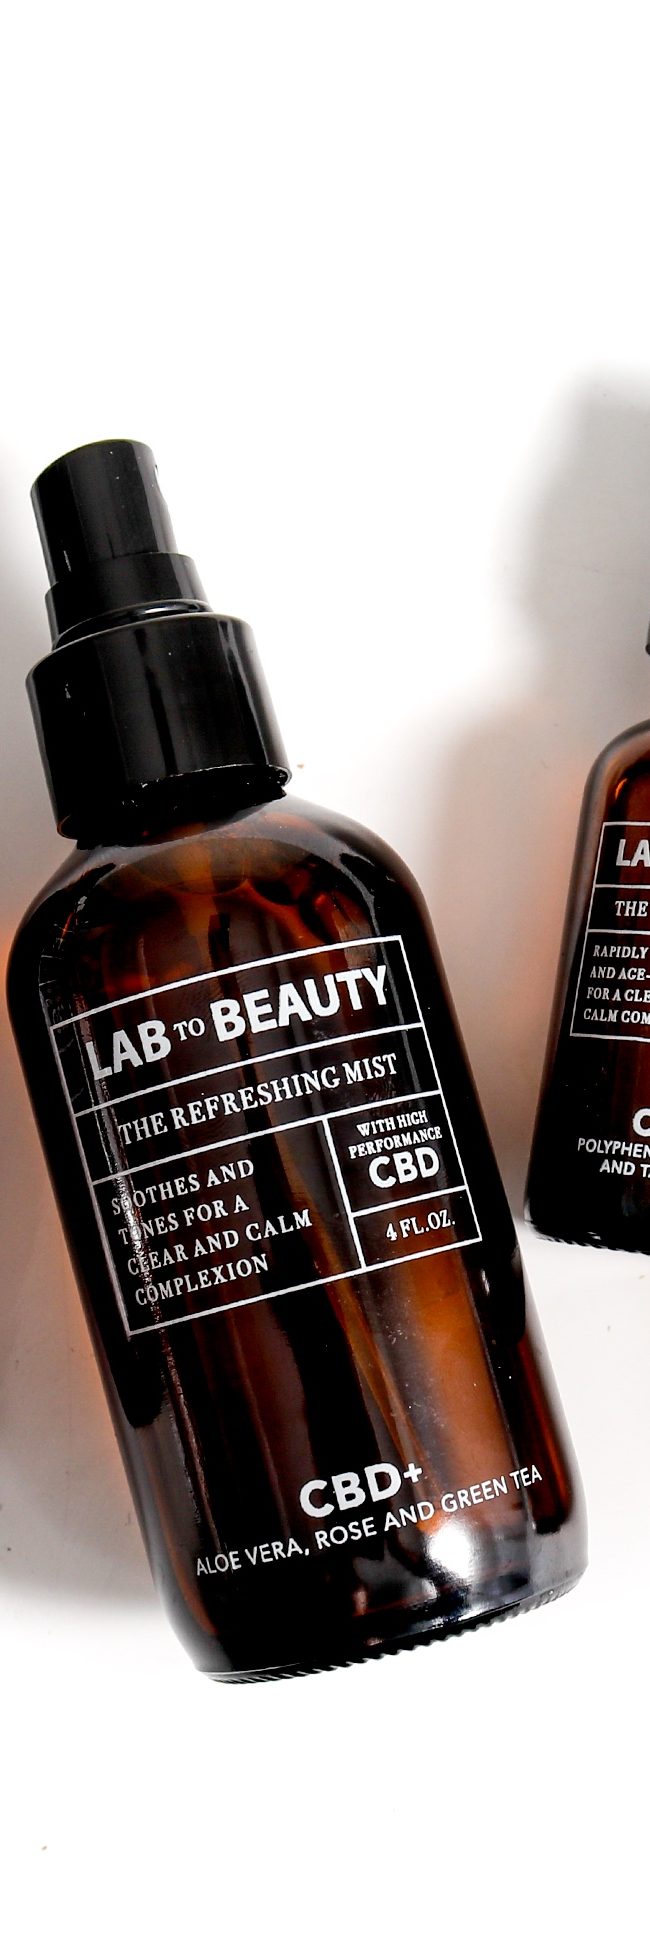 Lab to Beauty Supports GlobalGiving’s Coronavirus Relief Fund